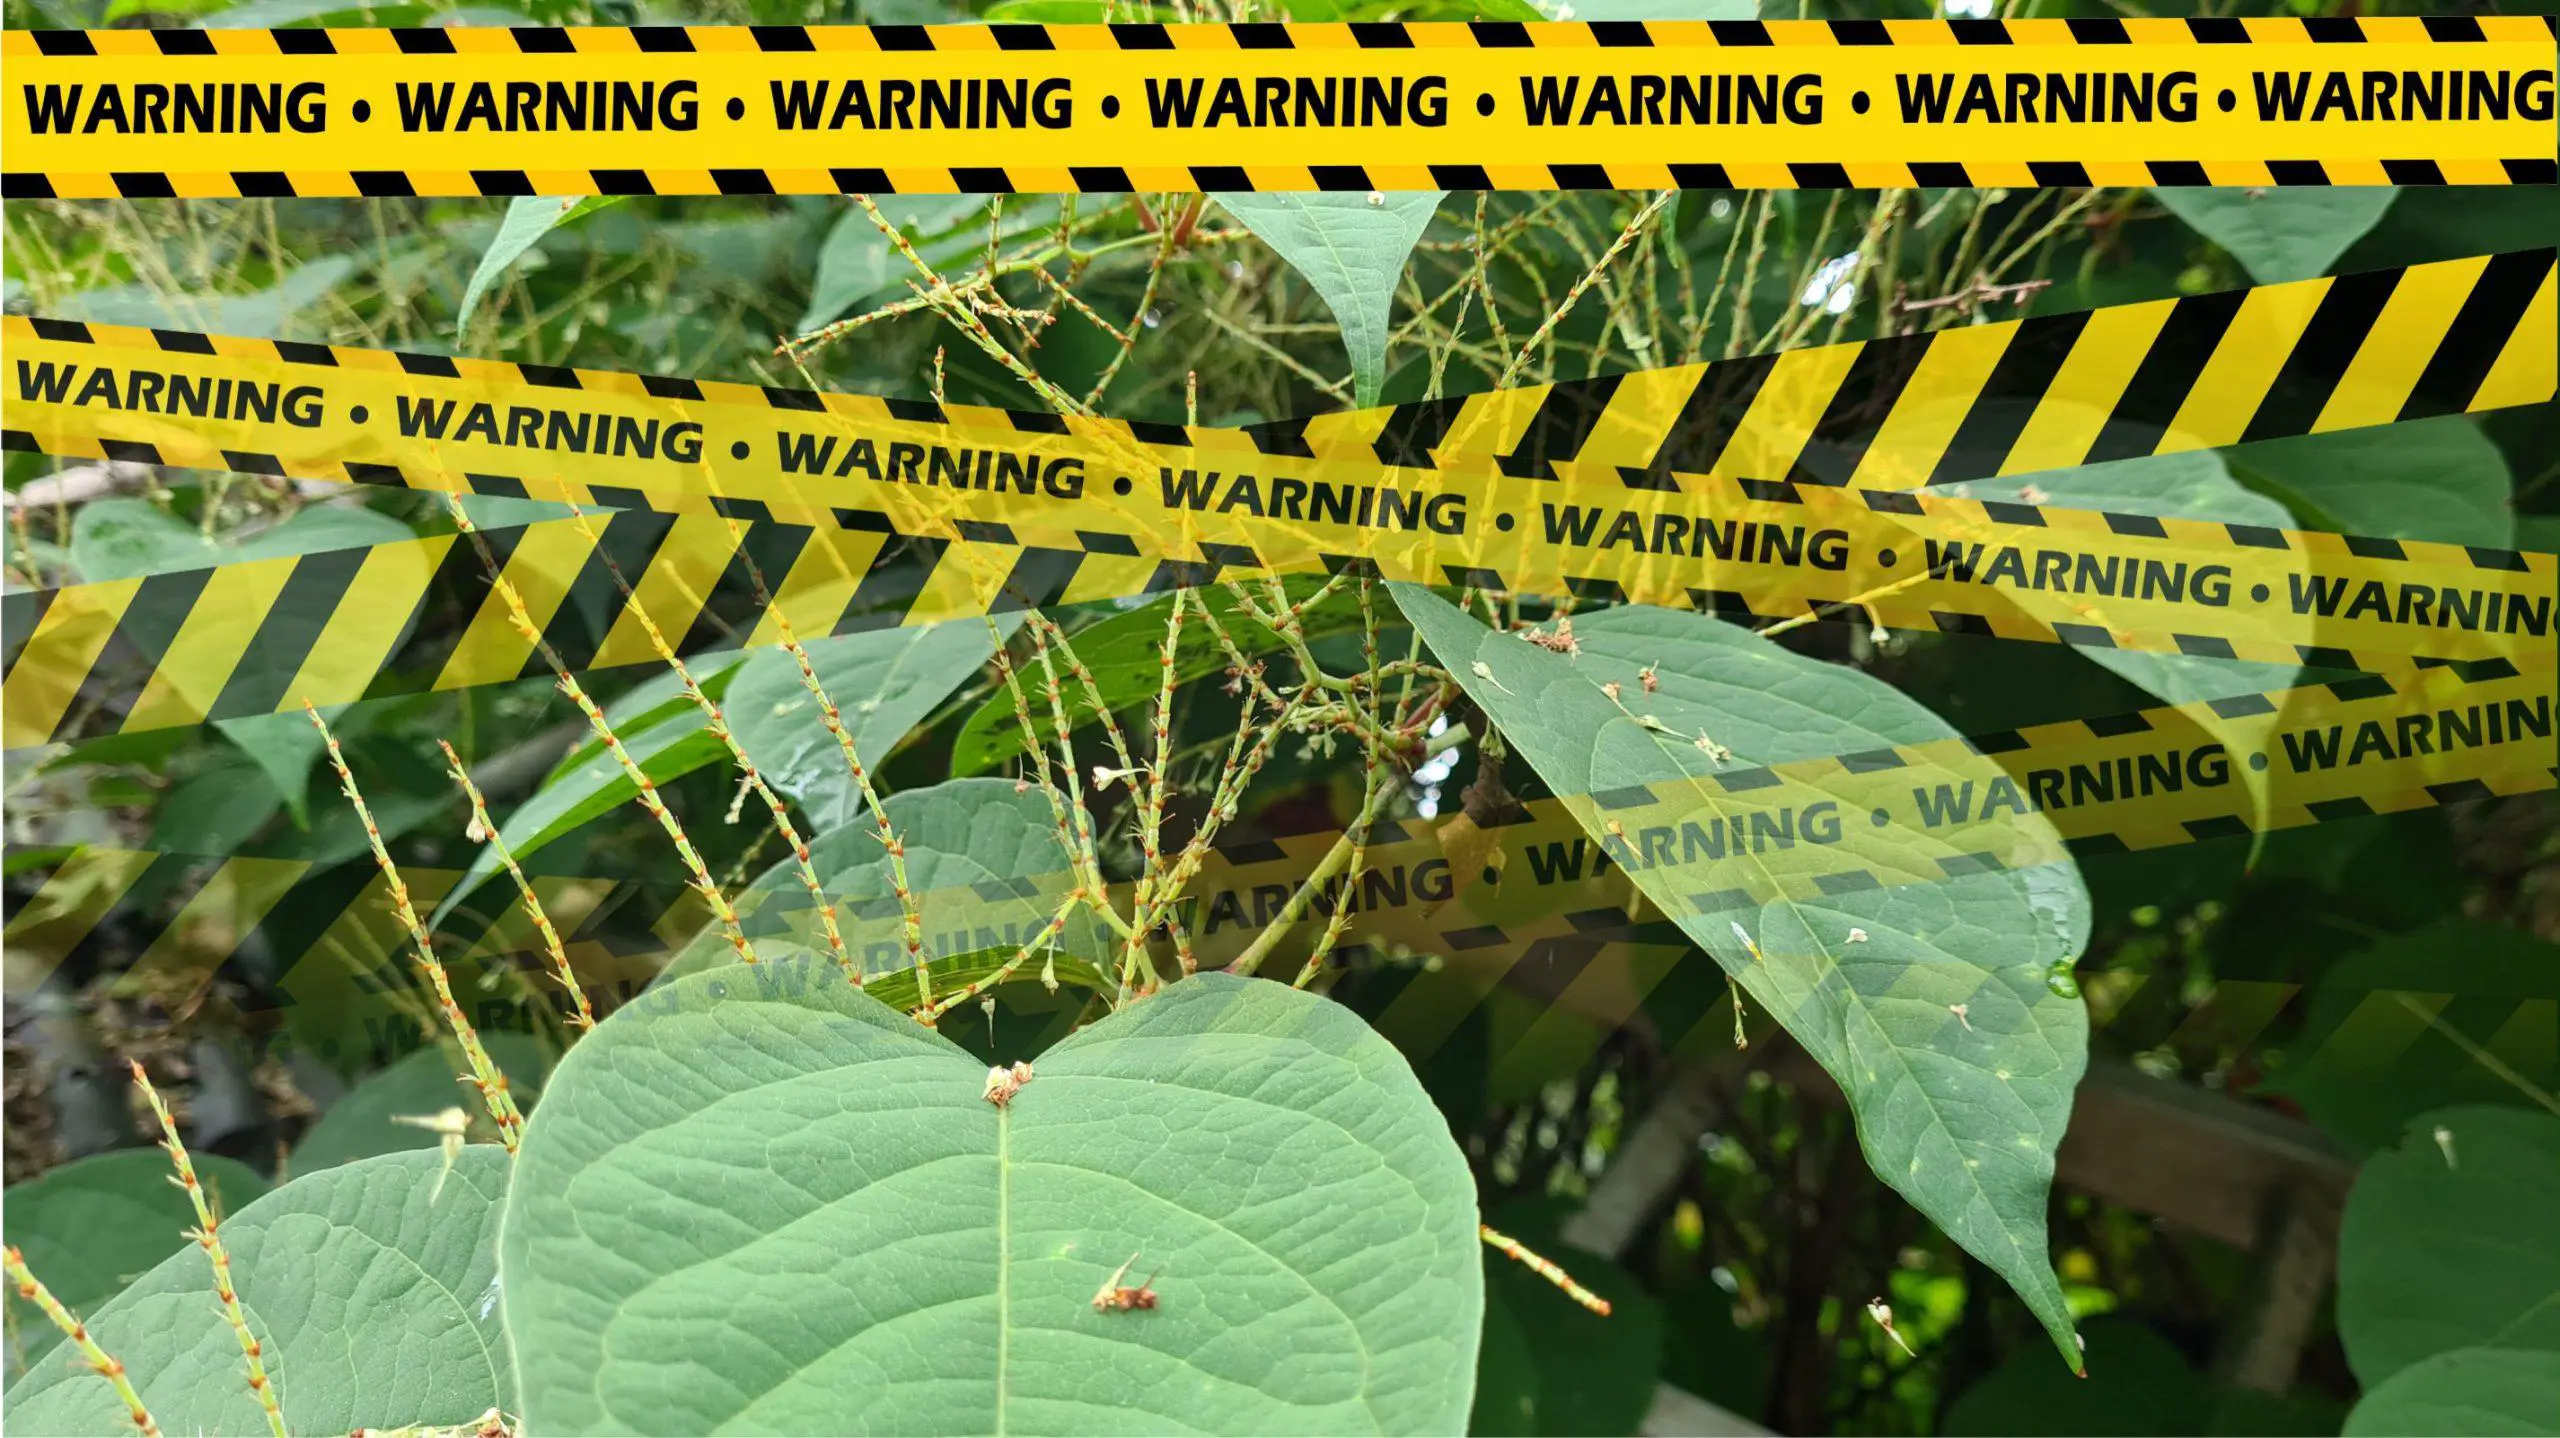 Map of Japanese Knotweed in the UK v2